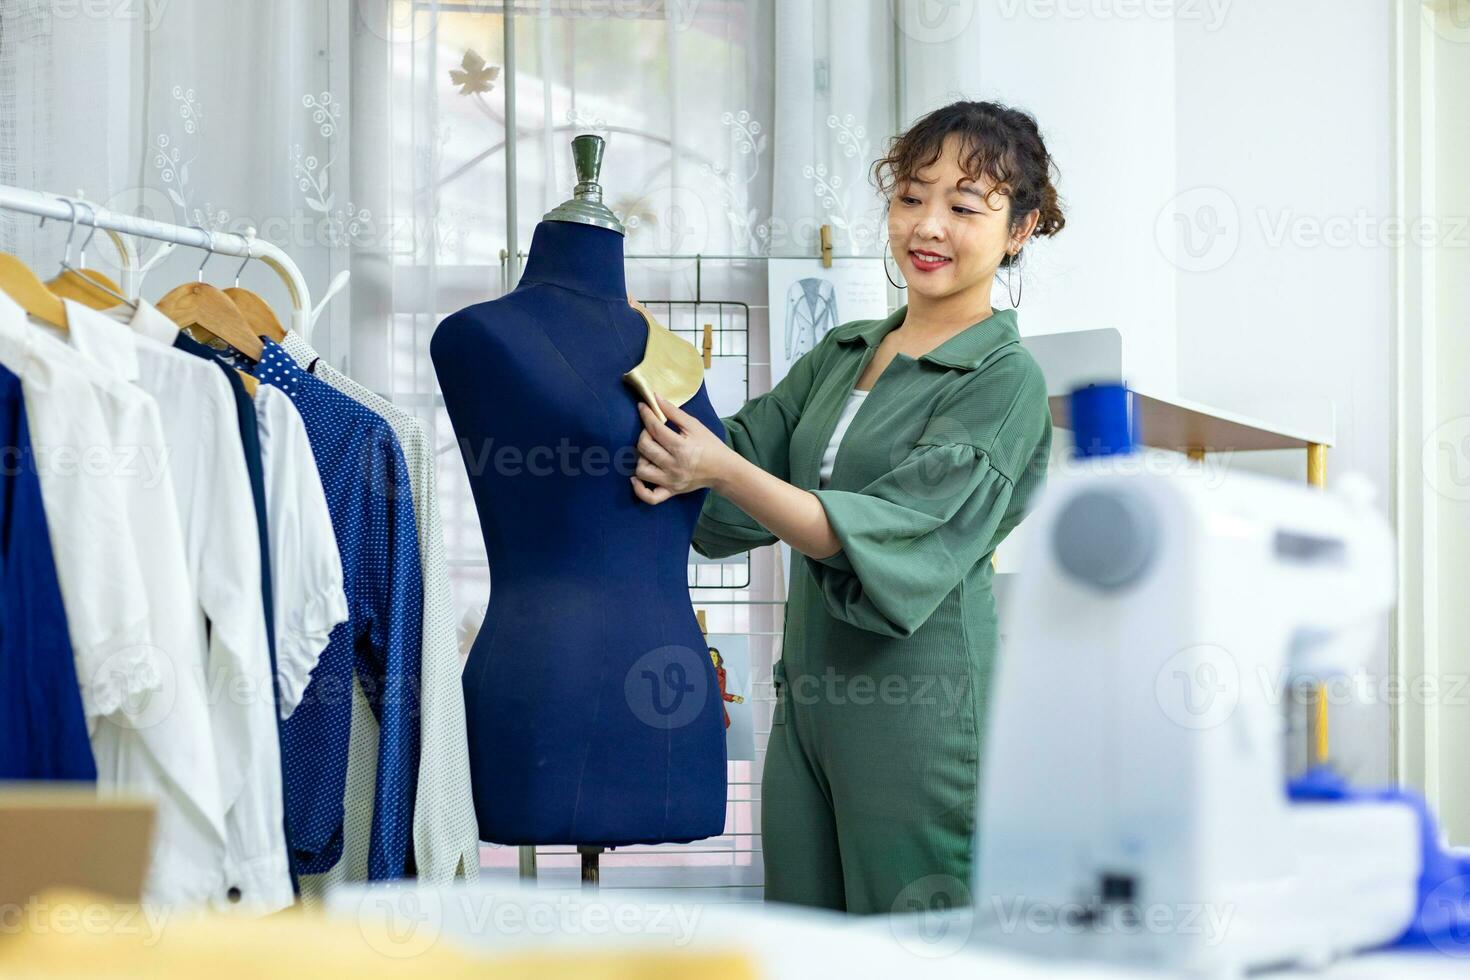 Fashionable freelance dressmaker is pinning her marking collar for new dress by pinning to mannequin while working in her artistic workshop studio for fashion design and clothing business industry photo